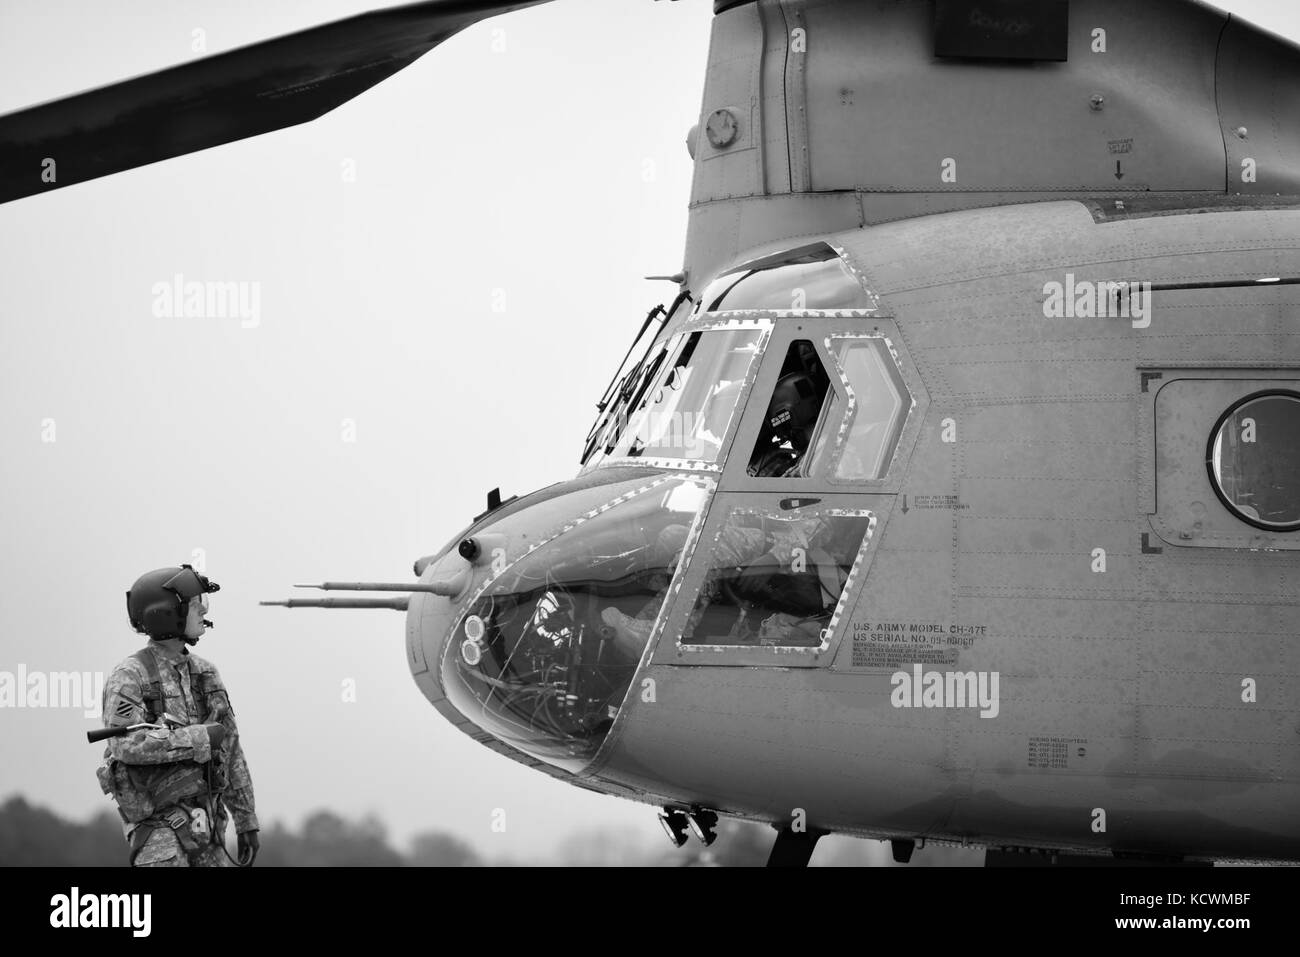 South Carolina National Guard Soldiers assigned to Detachment 1, Company B, 2-238th General Support Aviation Battalion, leave for a week-long training mission focused on high-altitude flight operations, aboard of a CH-47F Chinook heavy-lift cargo helicopter, Greenville, S.C., Feb. 24, 2017. The crew will attend a power management-centered course at the High-Altitude ARNG Aviation Training Site (HAATS), Eagle County, CO. (U.S. Army National Guard photo by Staff Sgt. Roberto Di Giovine) Stock Photo